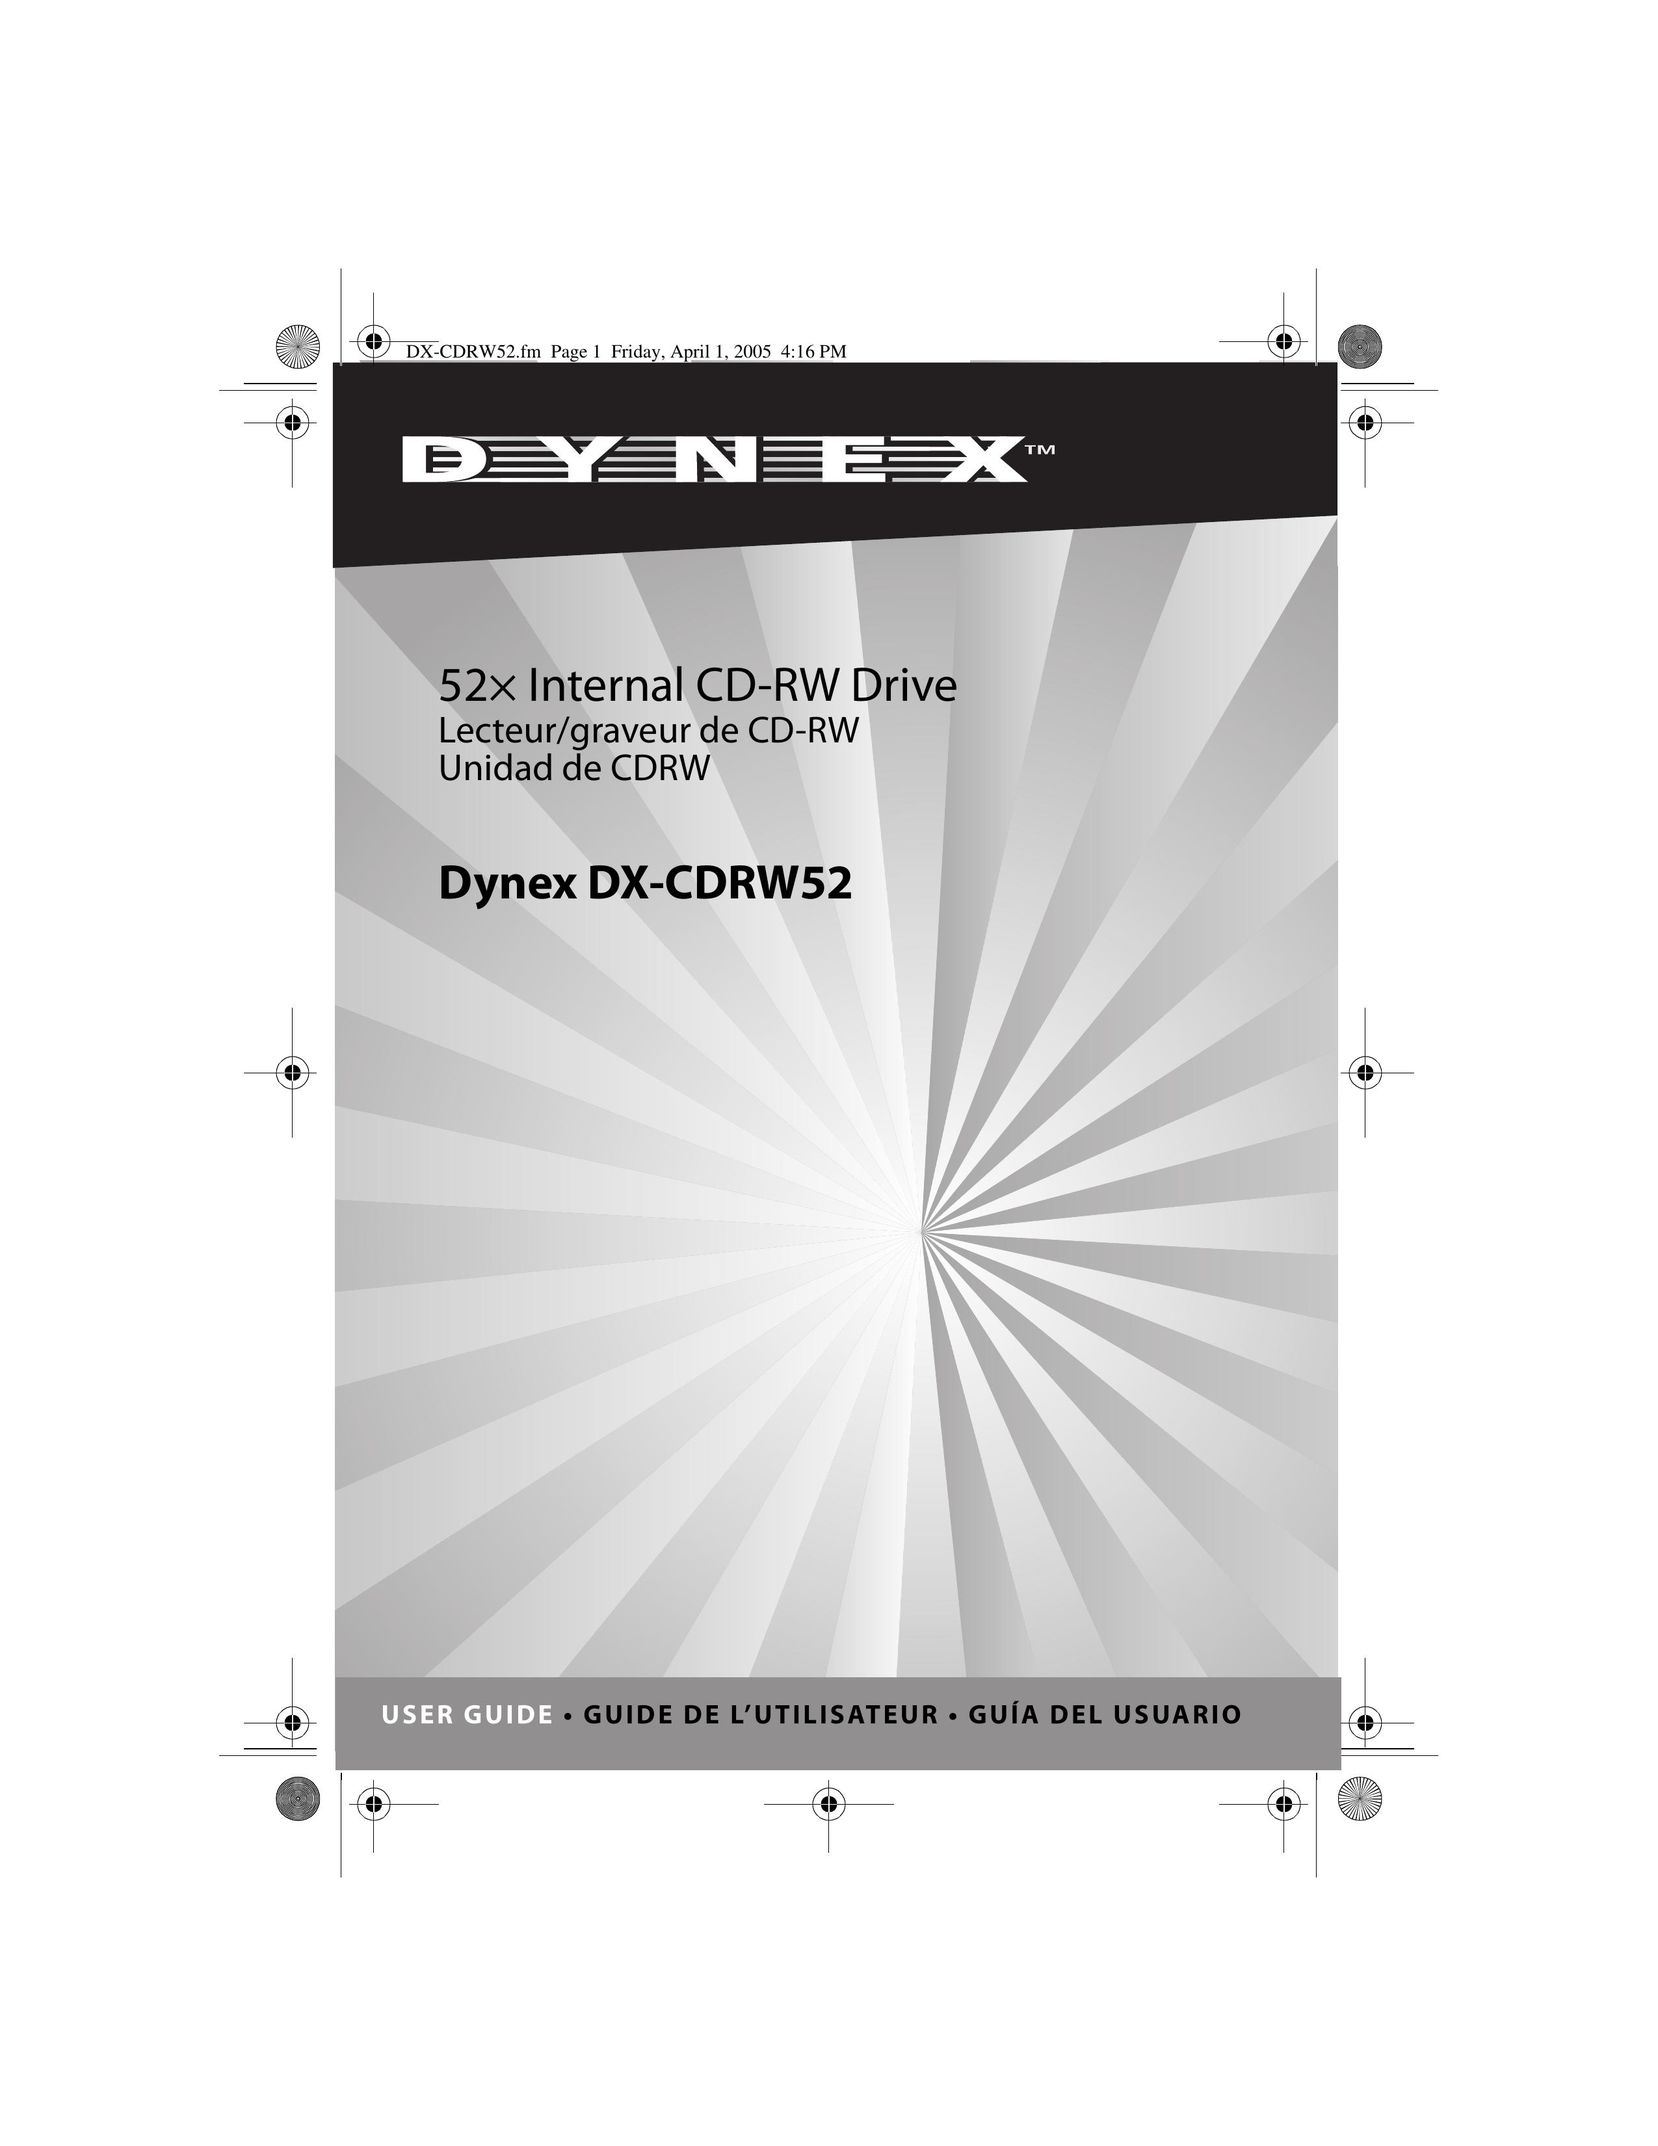 Dynex DX-CDRW52 Computer Drive User Manual (Page 1)